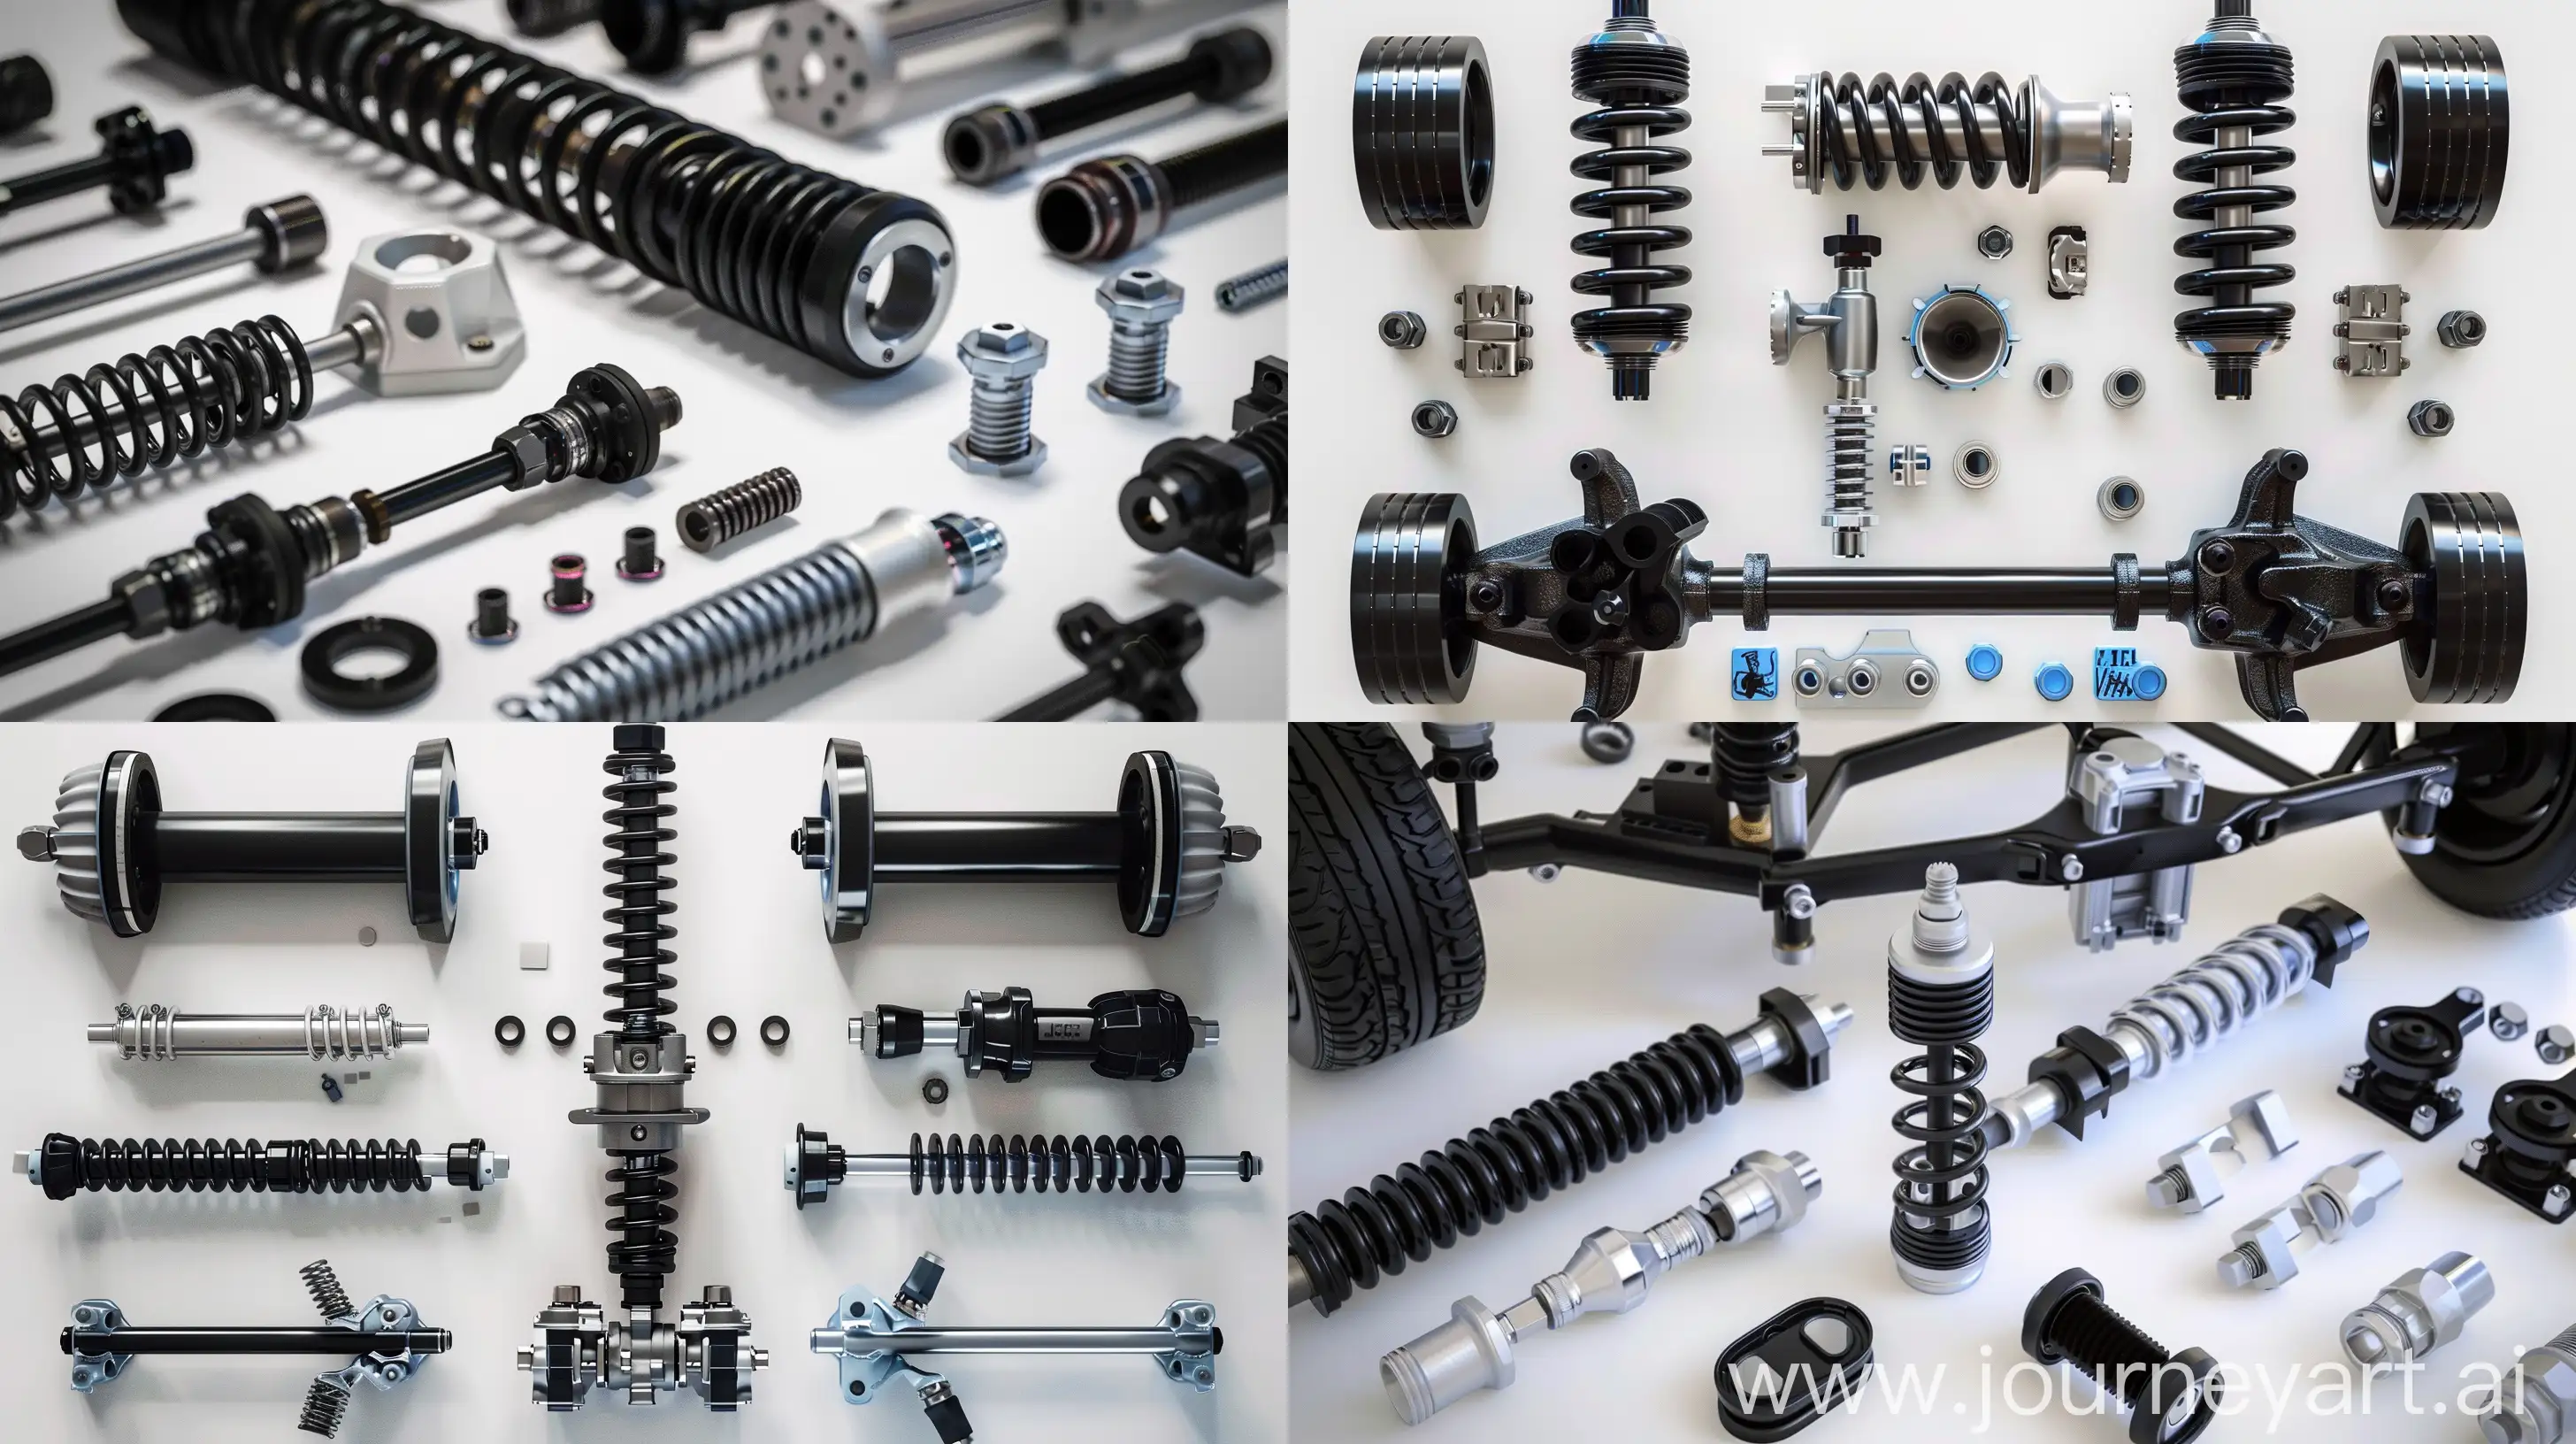 A photorealistic close-up of various car suspension components neatly arranged against a white background, suitable for a blog post cover. --ar 16:9

